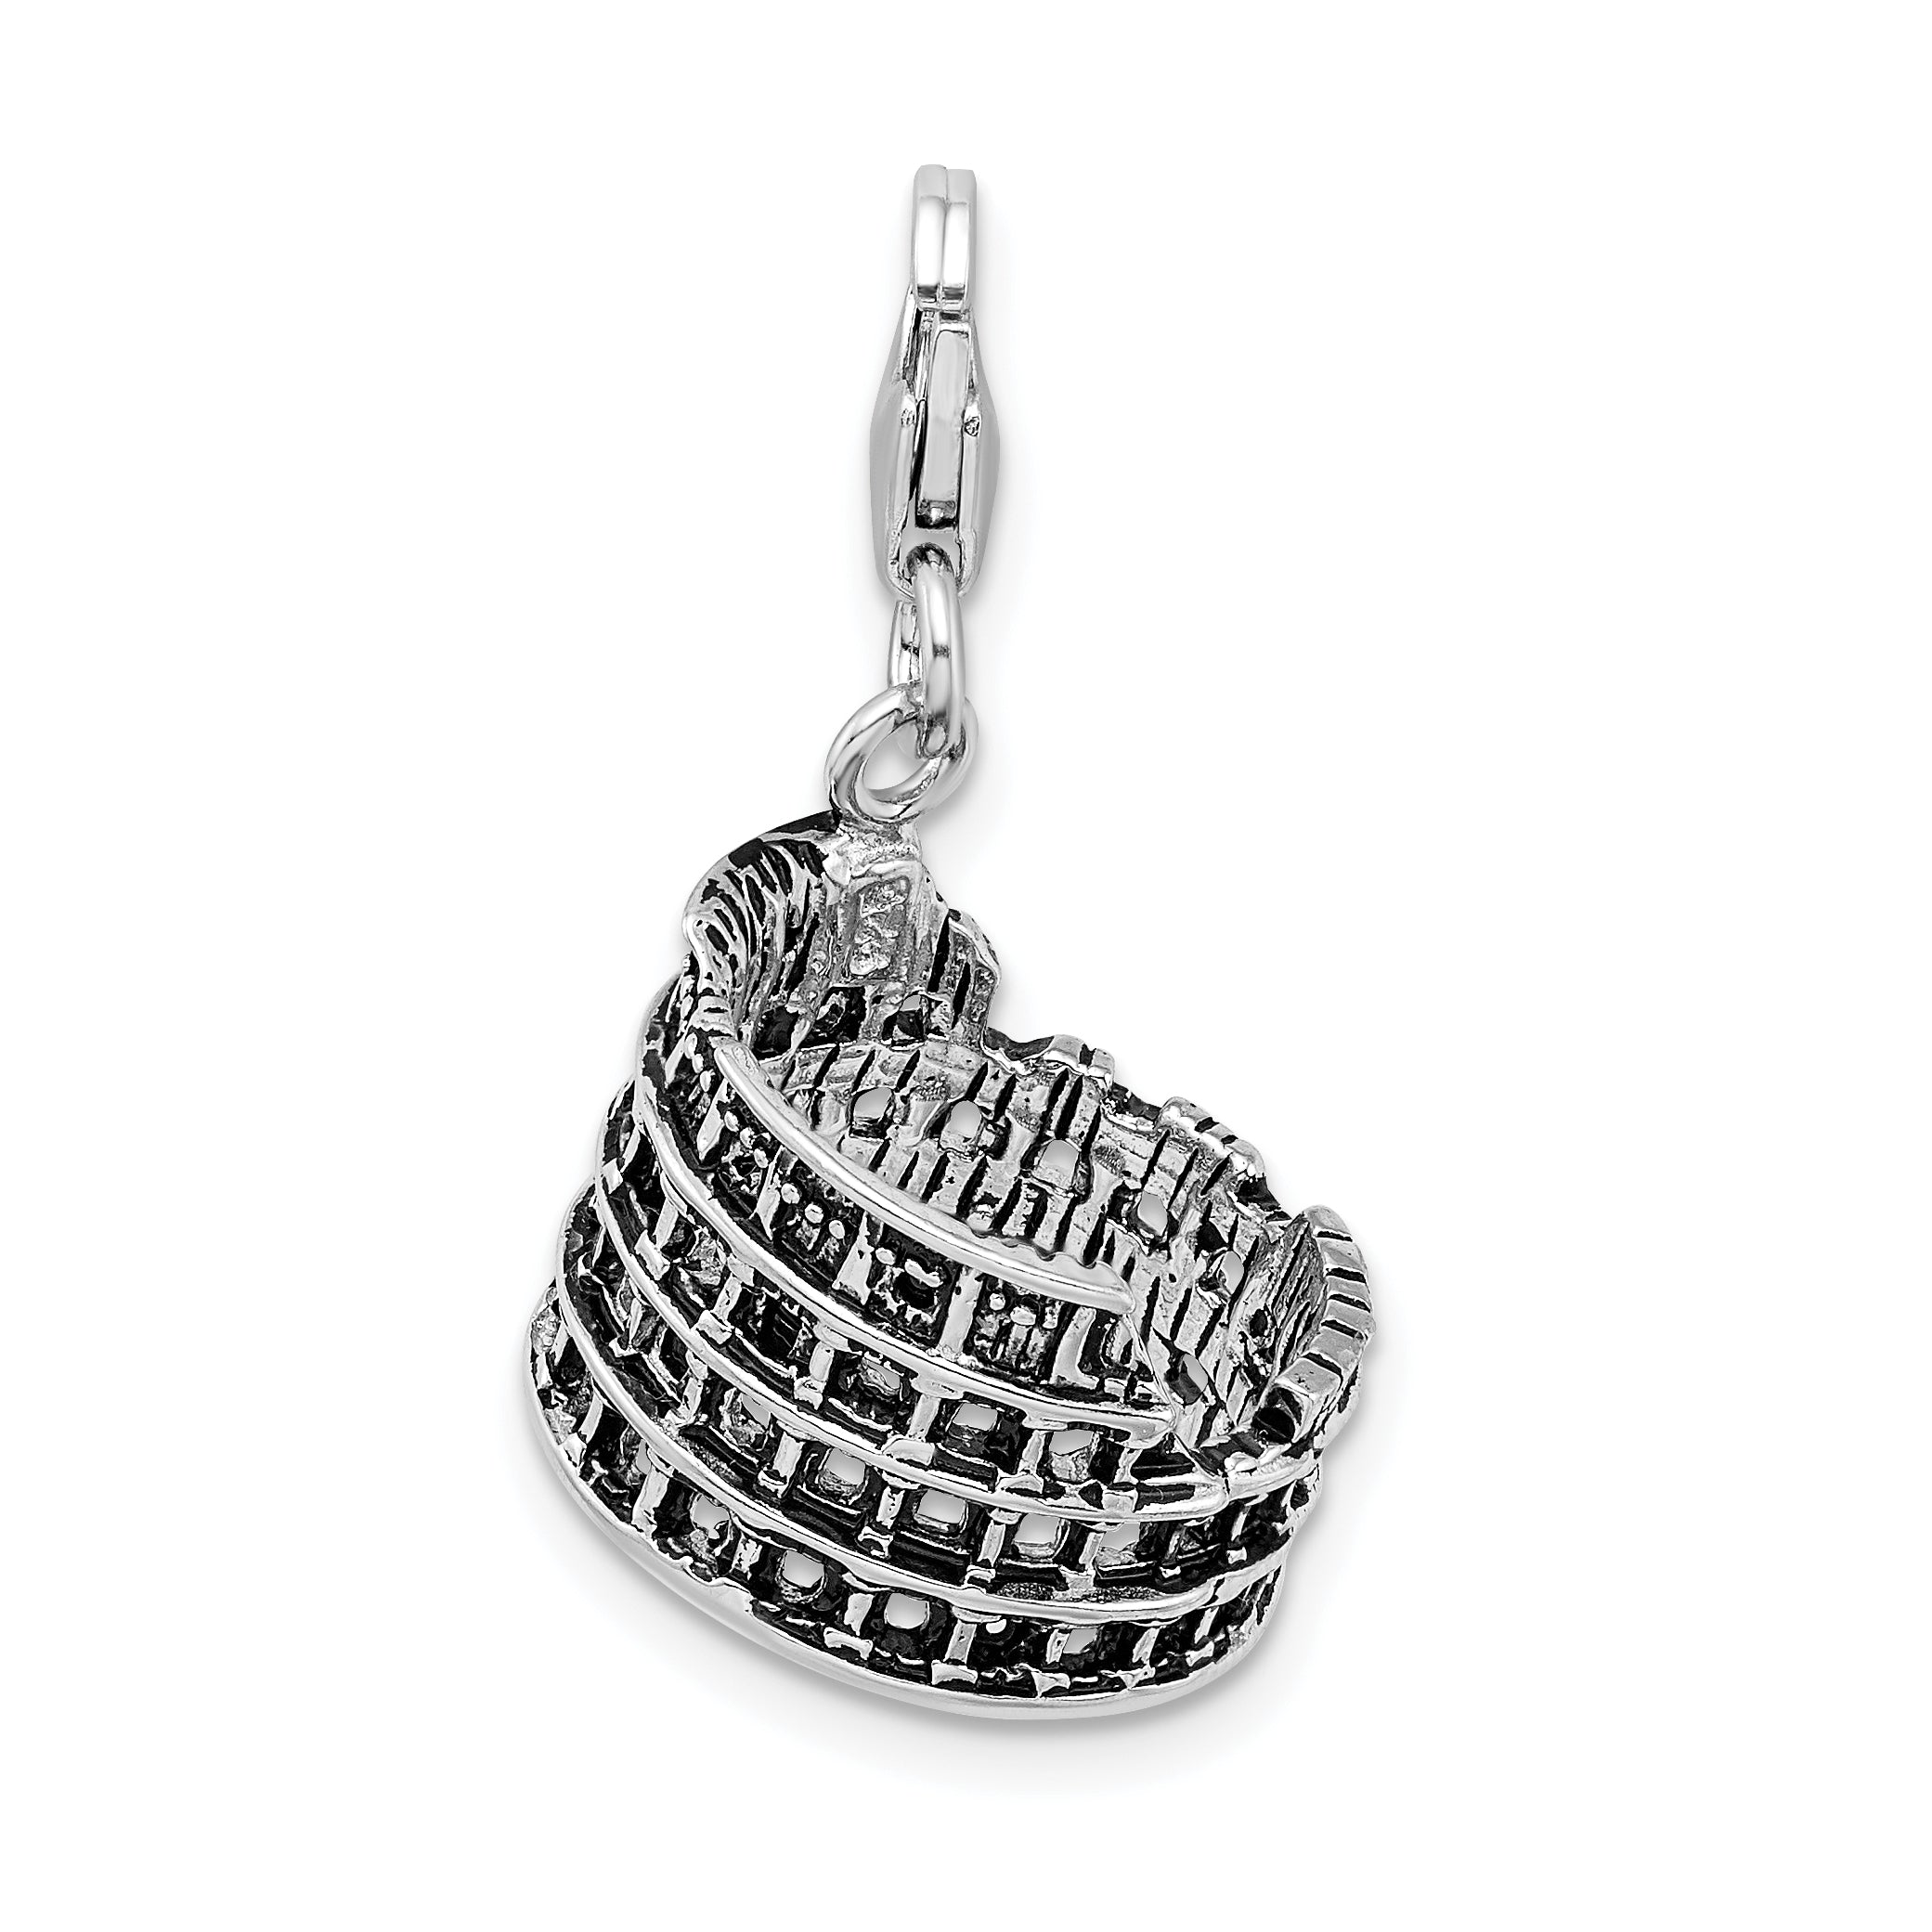 Amore La Vita Sterling Silver Rhodium-plated Polished 3-D Antiqued Coliseum Charm with Fancy Lobster Clasp